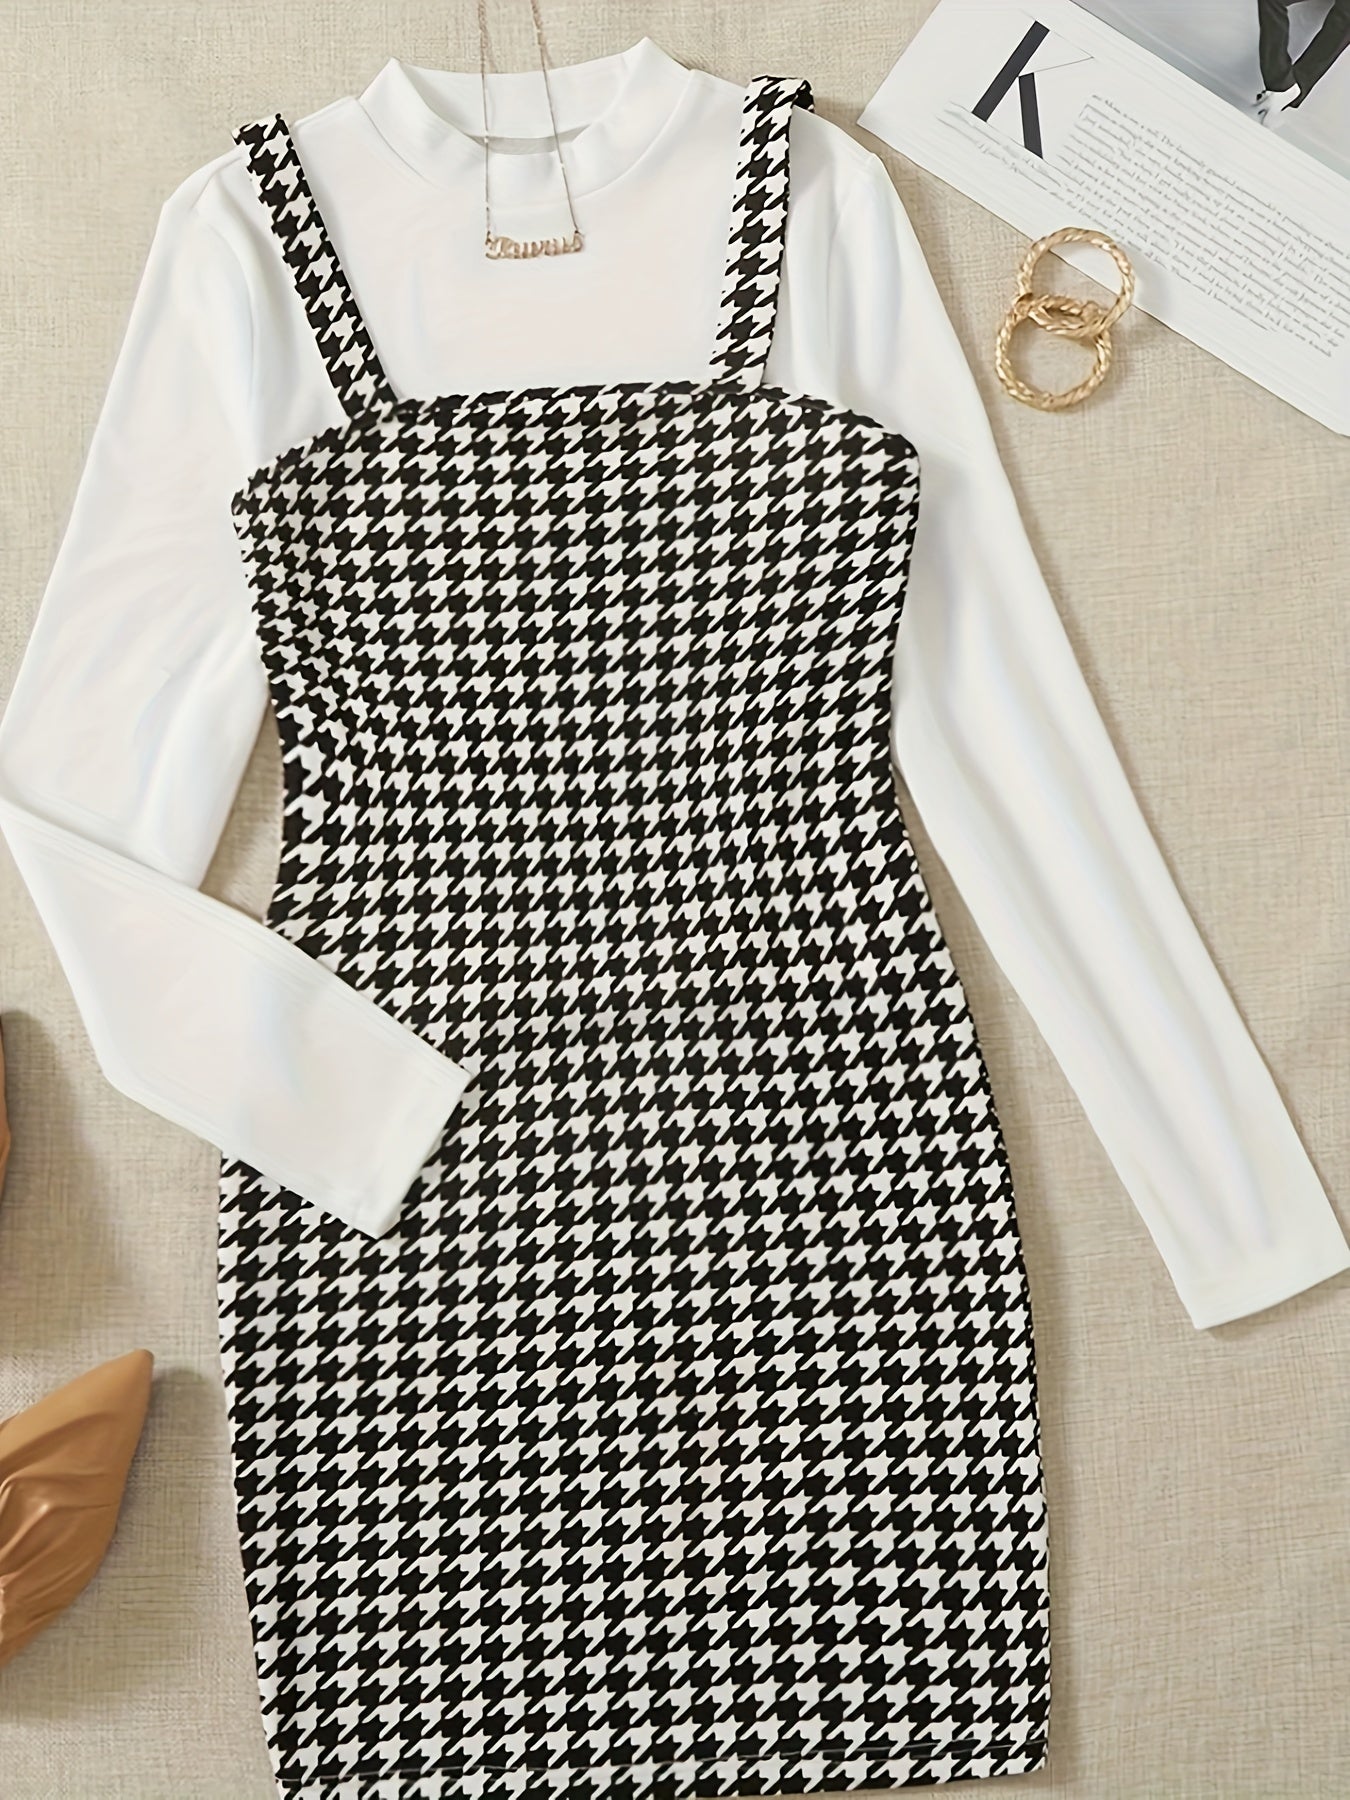 vlovelaw  Simple Elegant Two-piece Set, Solid Long Sleeve Tops & Houndstooth Print Overall Dress Outfits, Women's Clothing